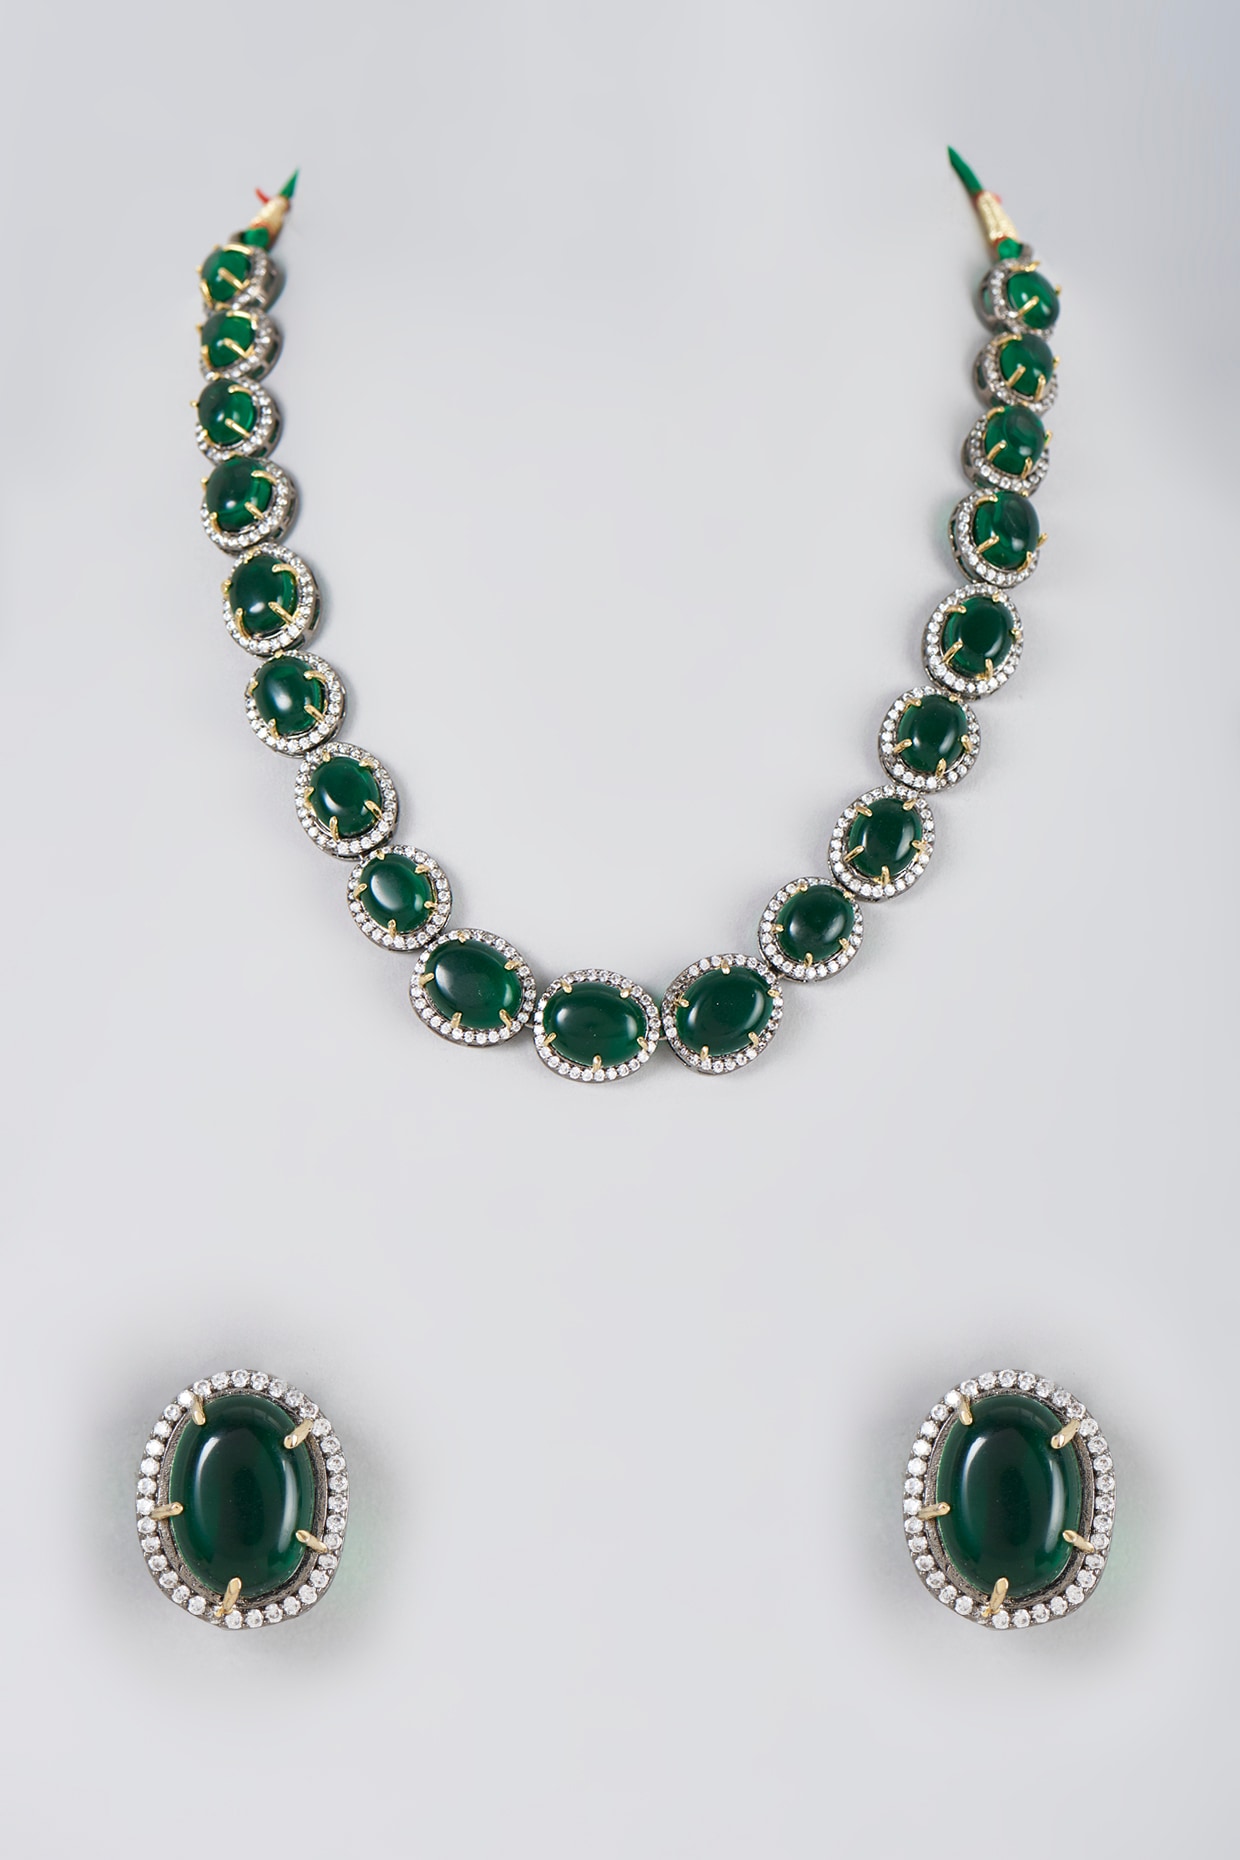 Simple Emerald Necklace and Earrings Set - Indian Jewellery Designs